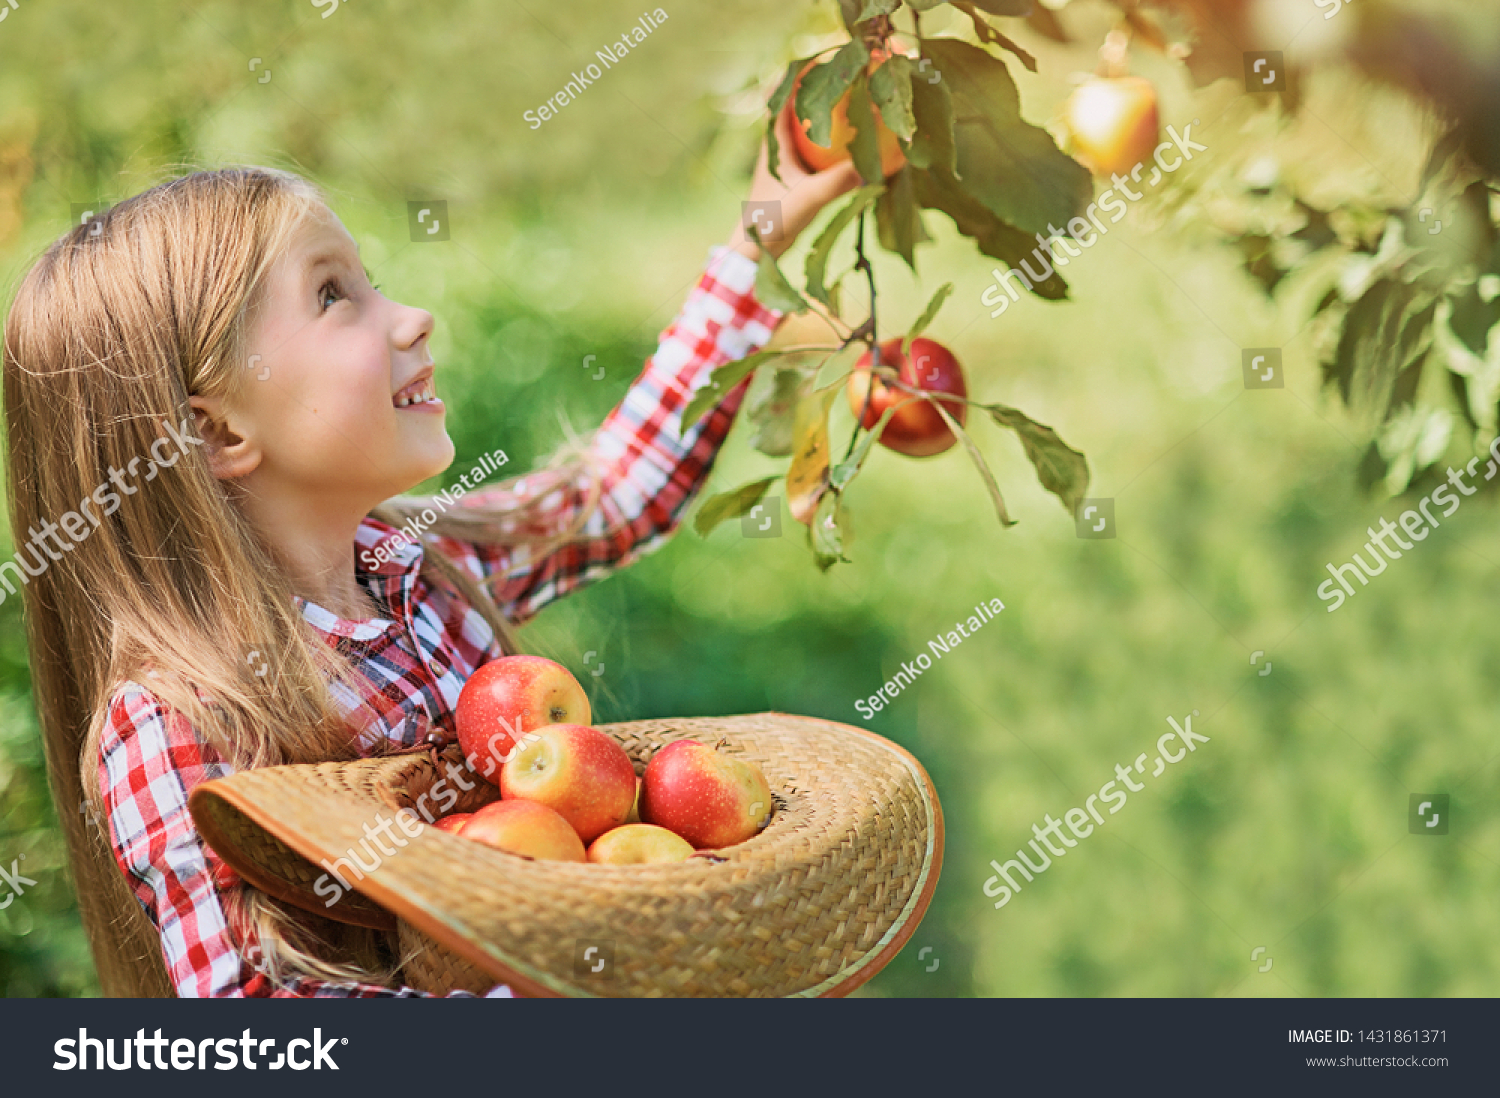 Girl with Apple in the Apple Orchard. Beautiful Girl Eating Organic Apple in the Orchard. Harvest Concept. Garden, Toddler eating fruits at fall harvest. Apple picking. #1431861371